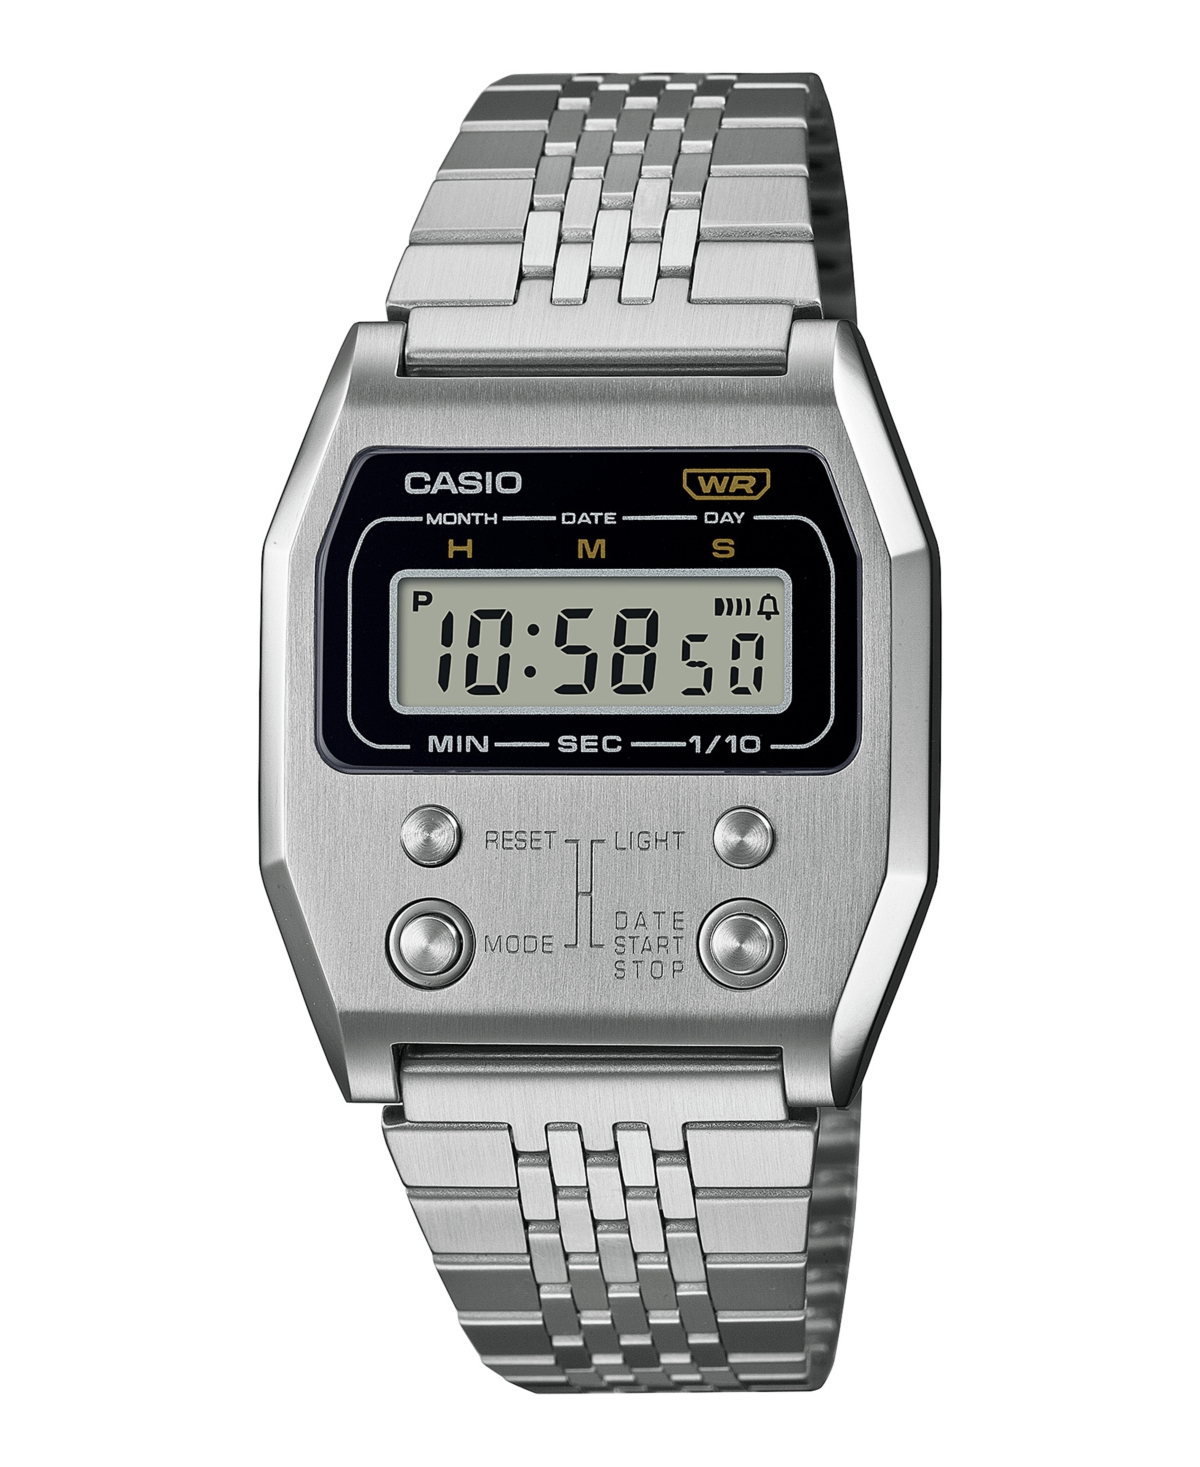 Unisex Digital Silver-Tone Stainless Steel Watch, 35mm, A1100D-1VT - Silver